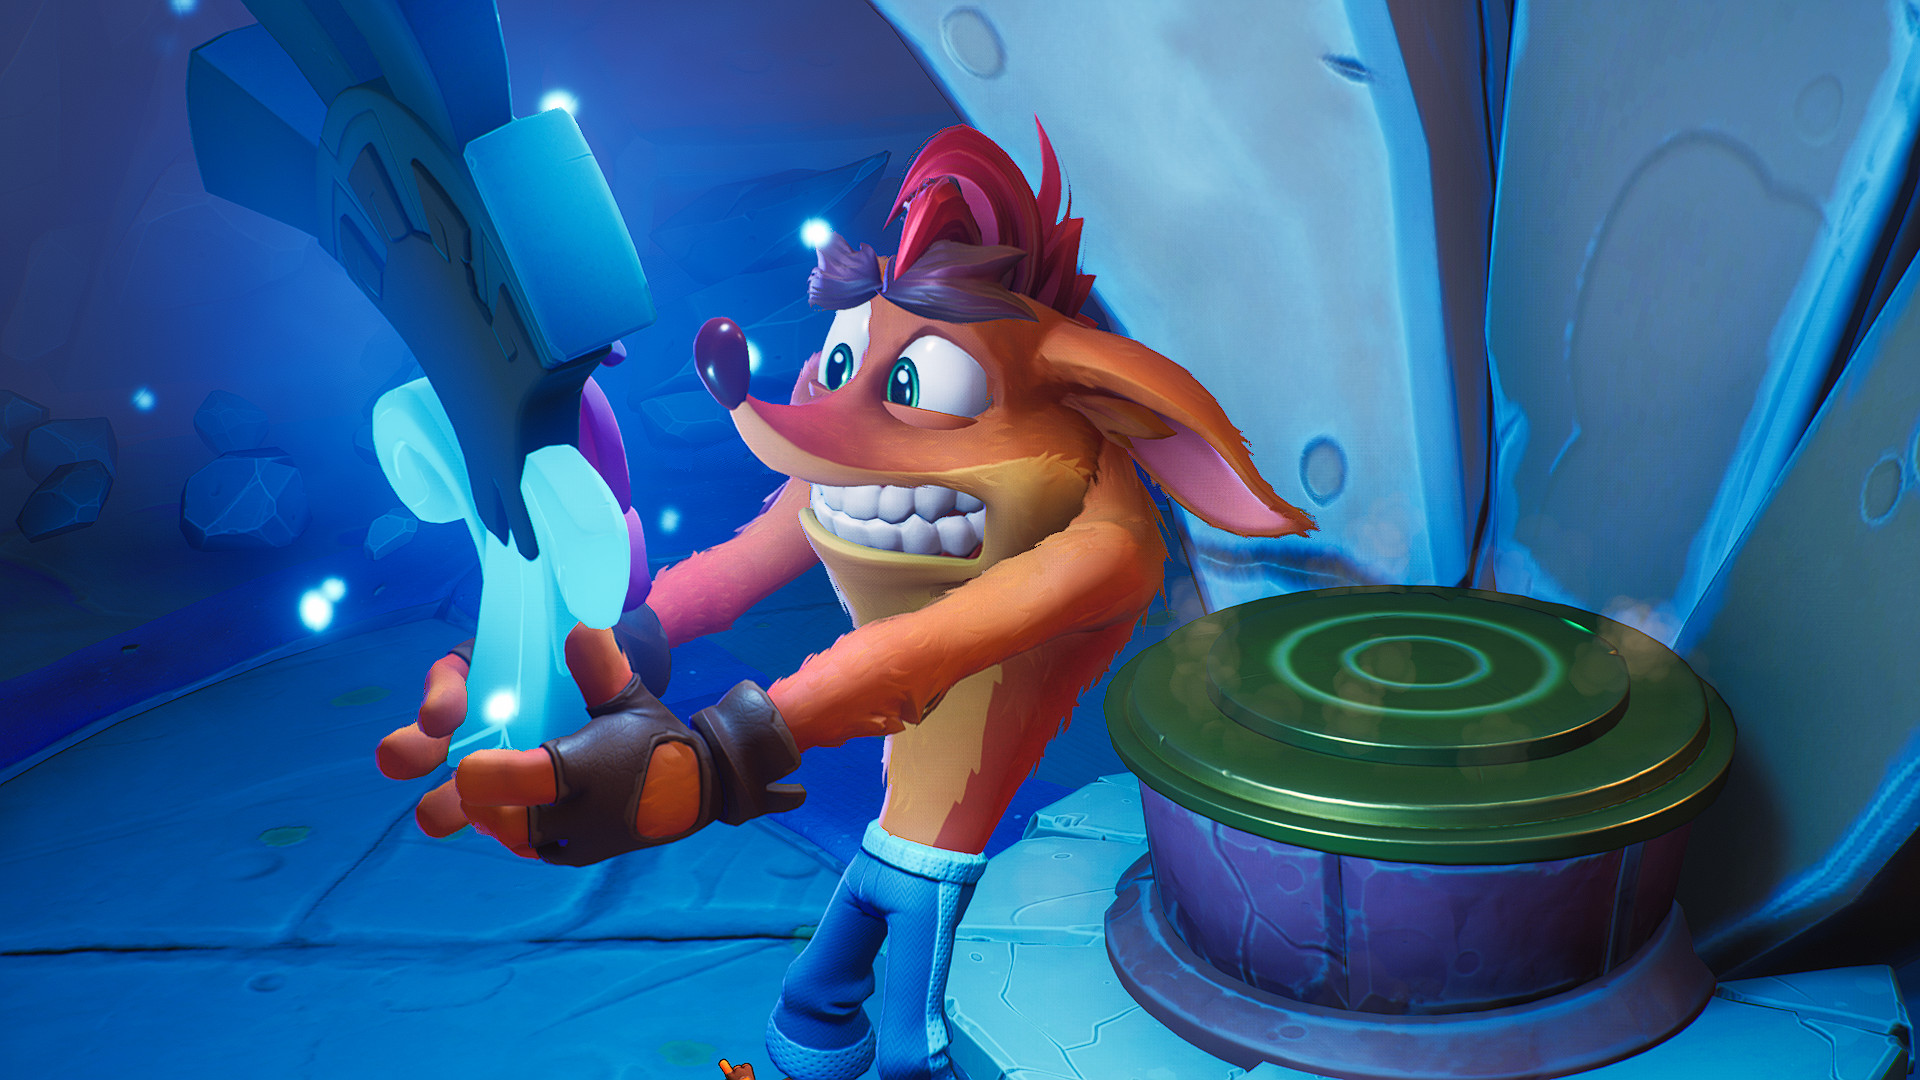 Crash Bandicoot 4: It's About Time Review